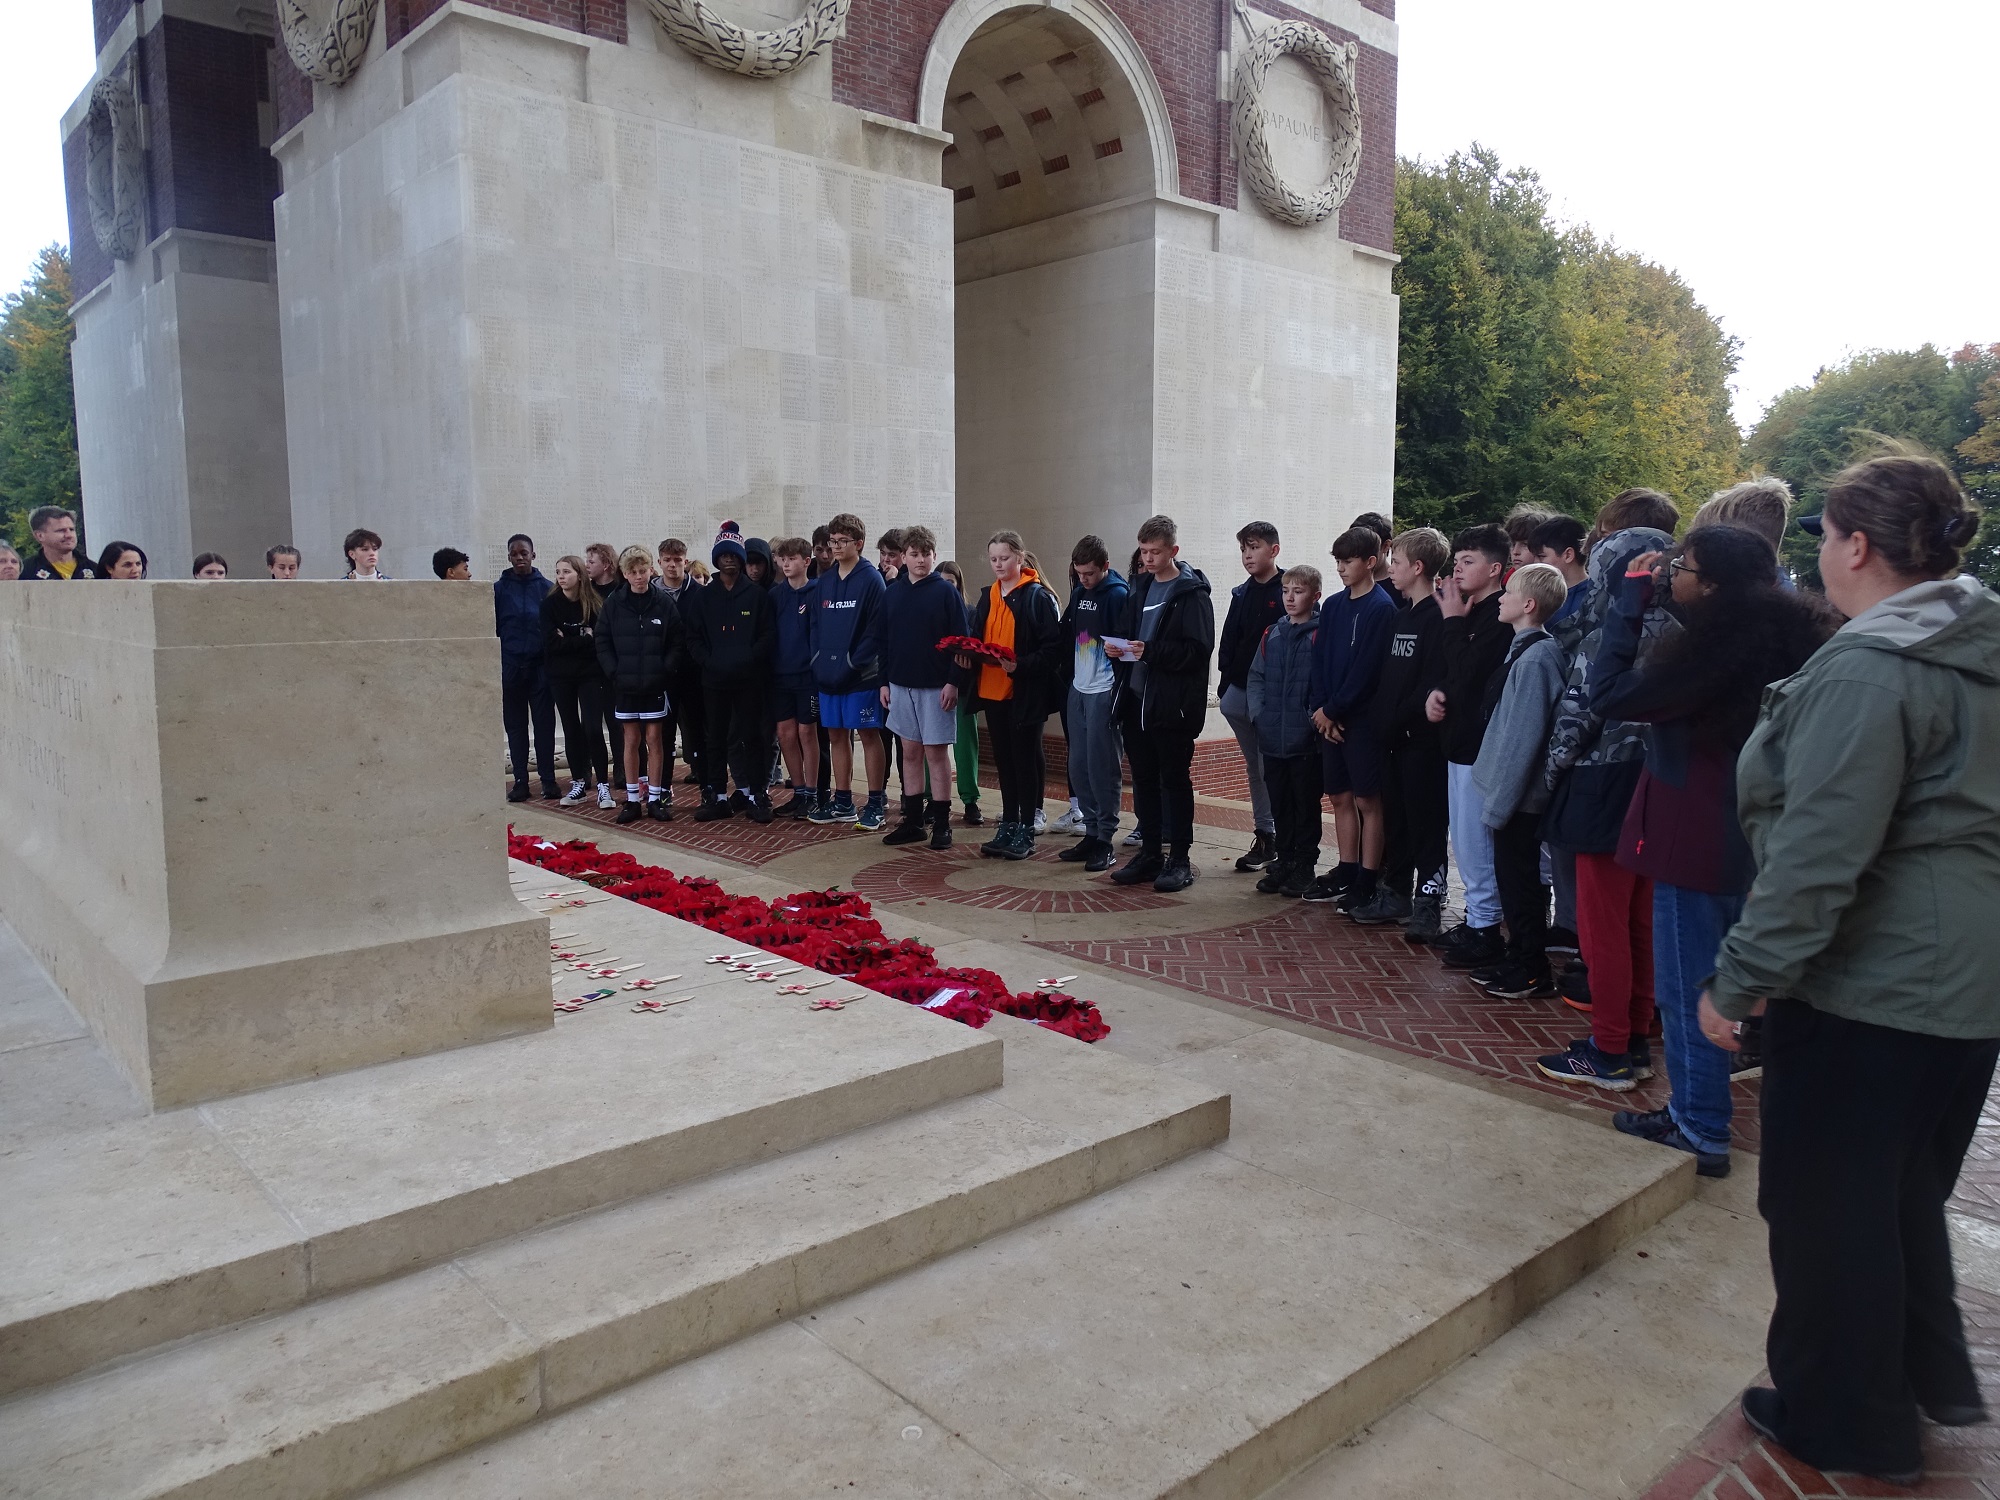 Third Year pupils pay their respects during their Battlefields trip